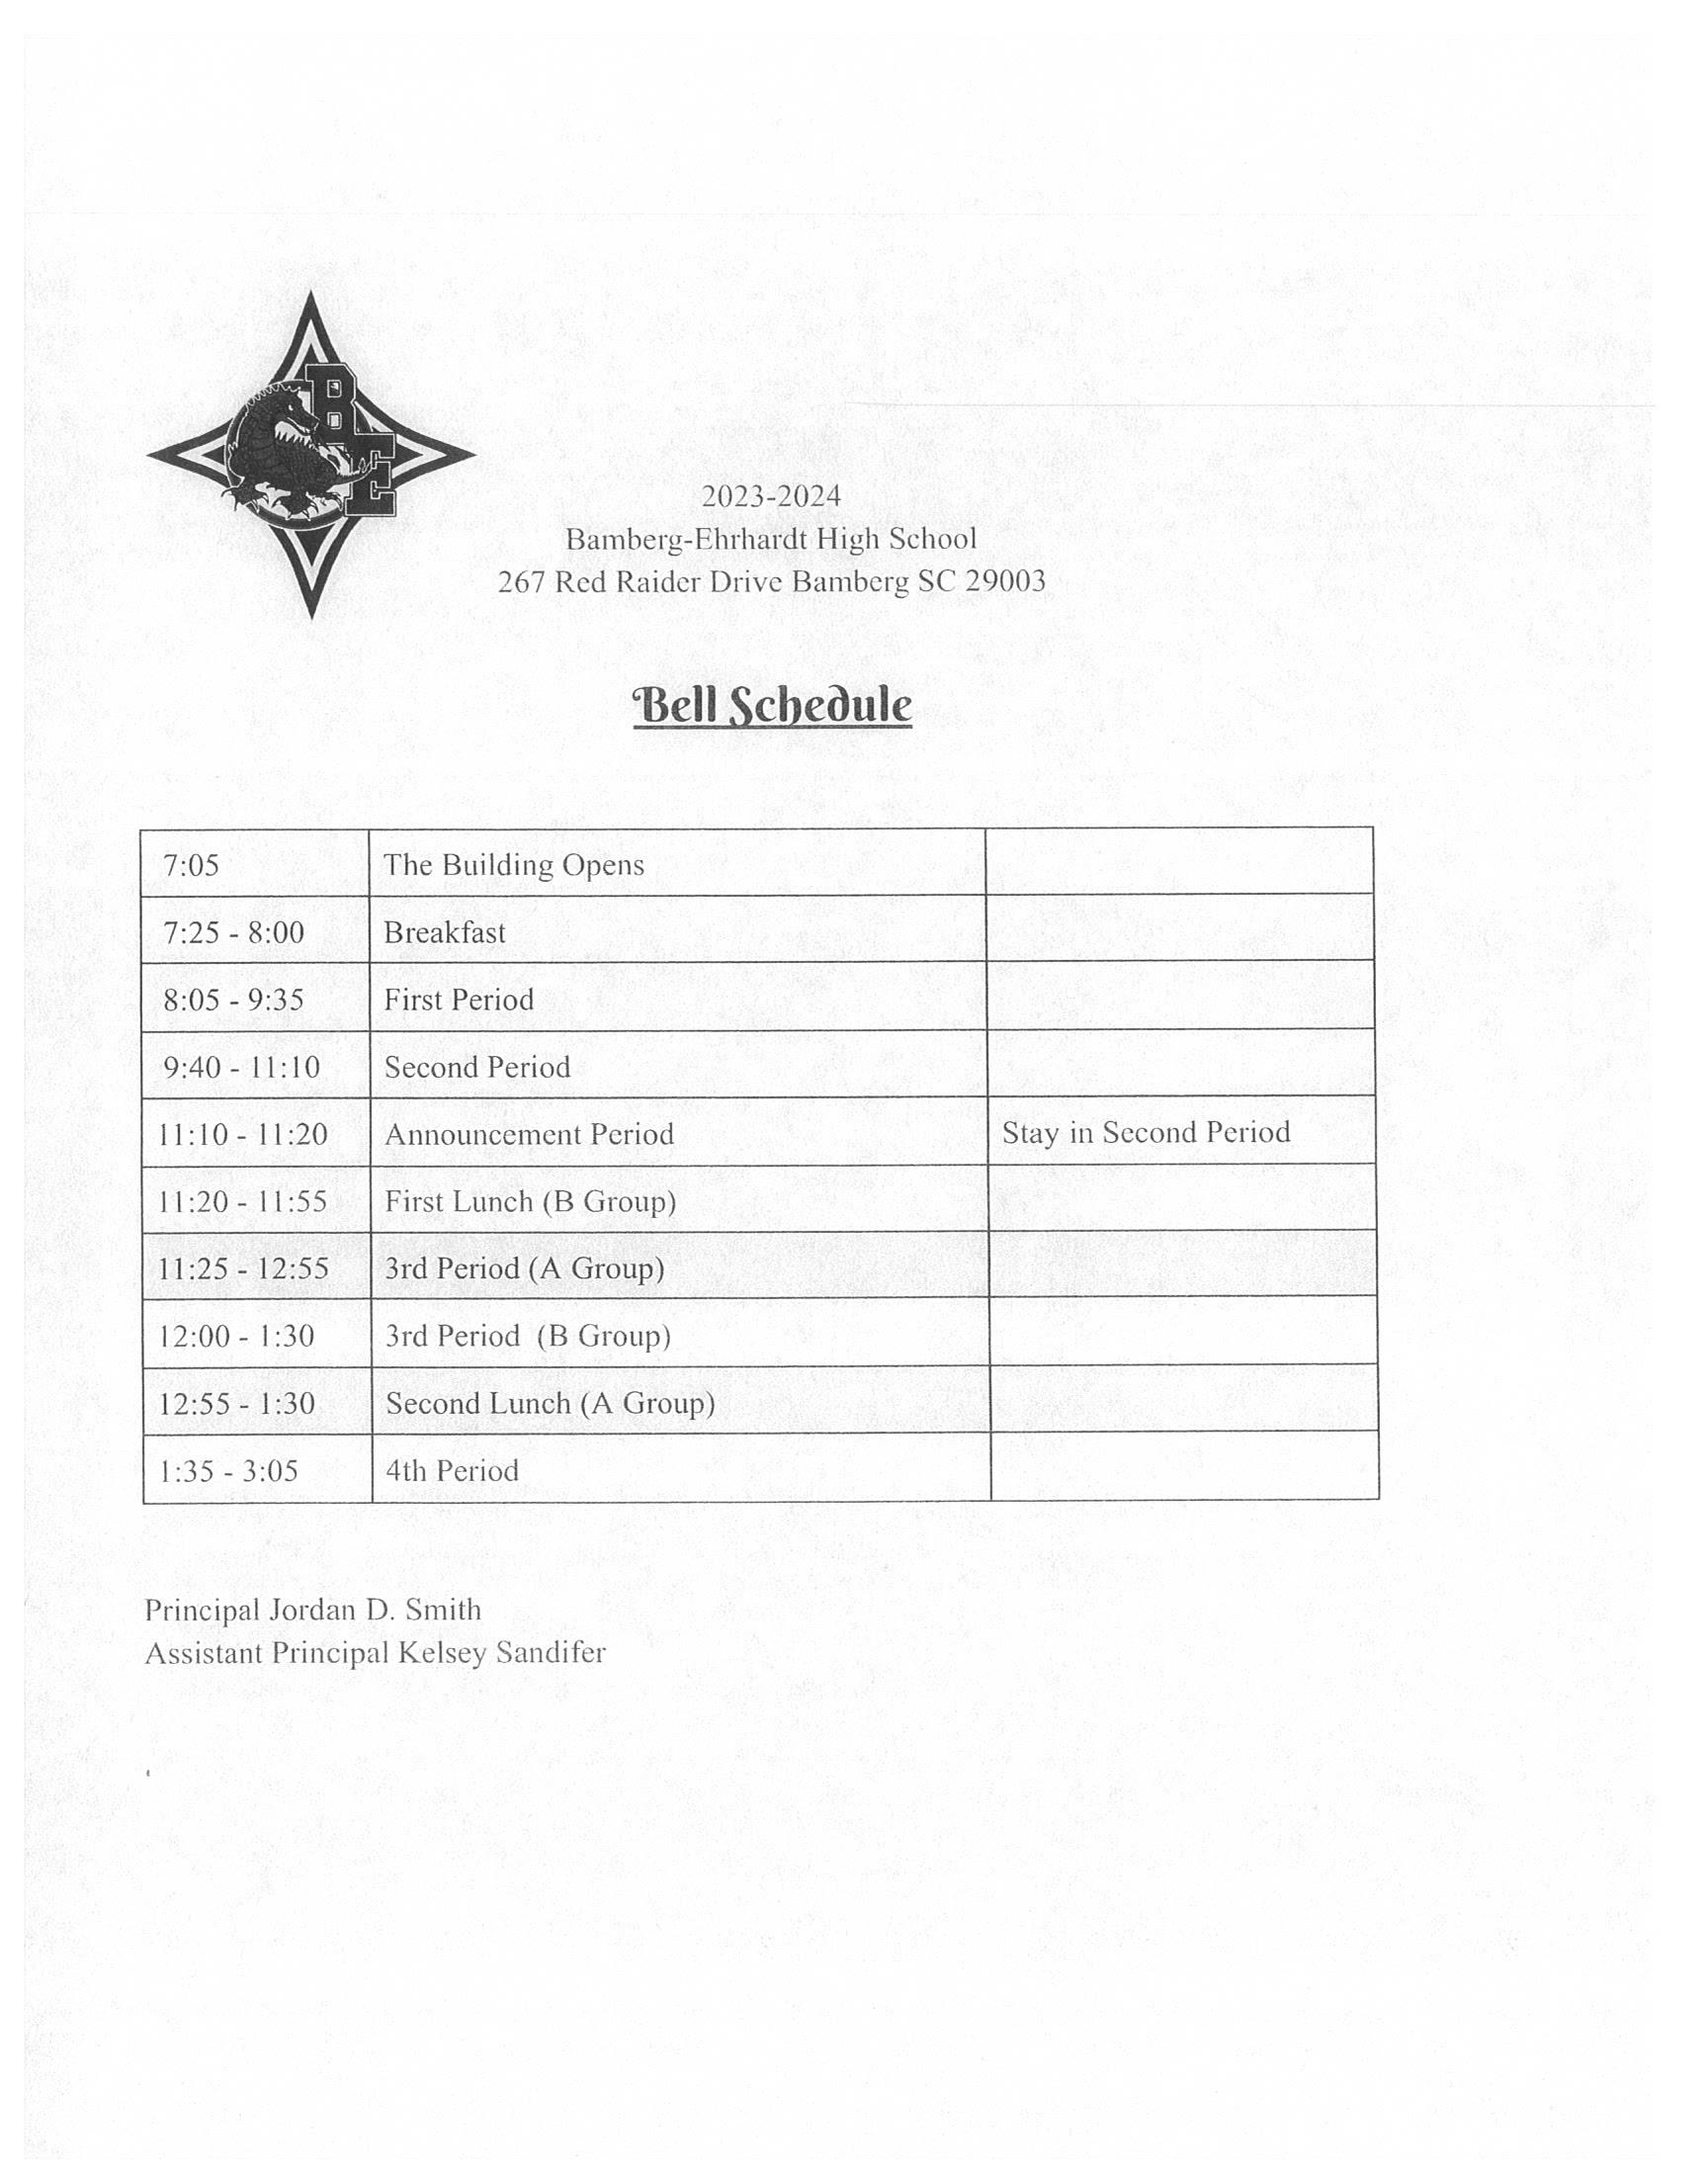 Bell Schedule Image, Downloadable version available below (revised)